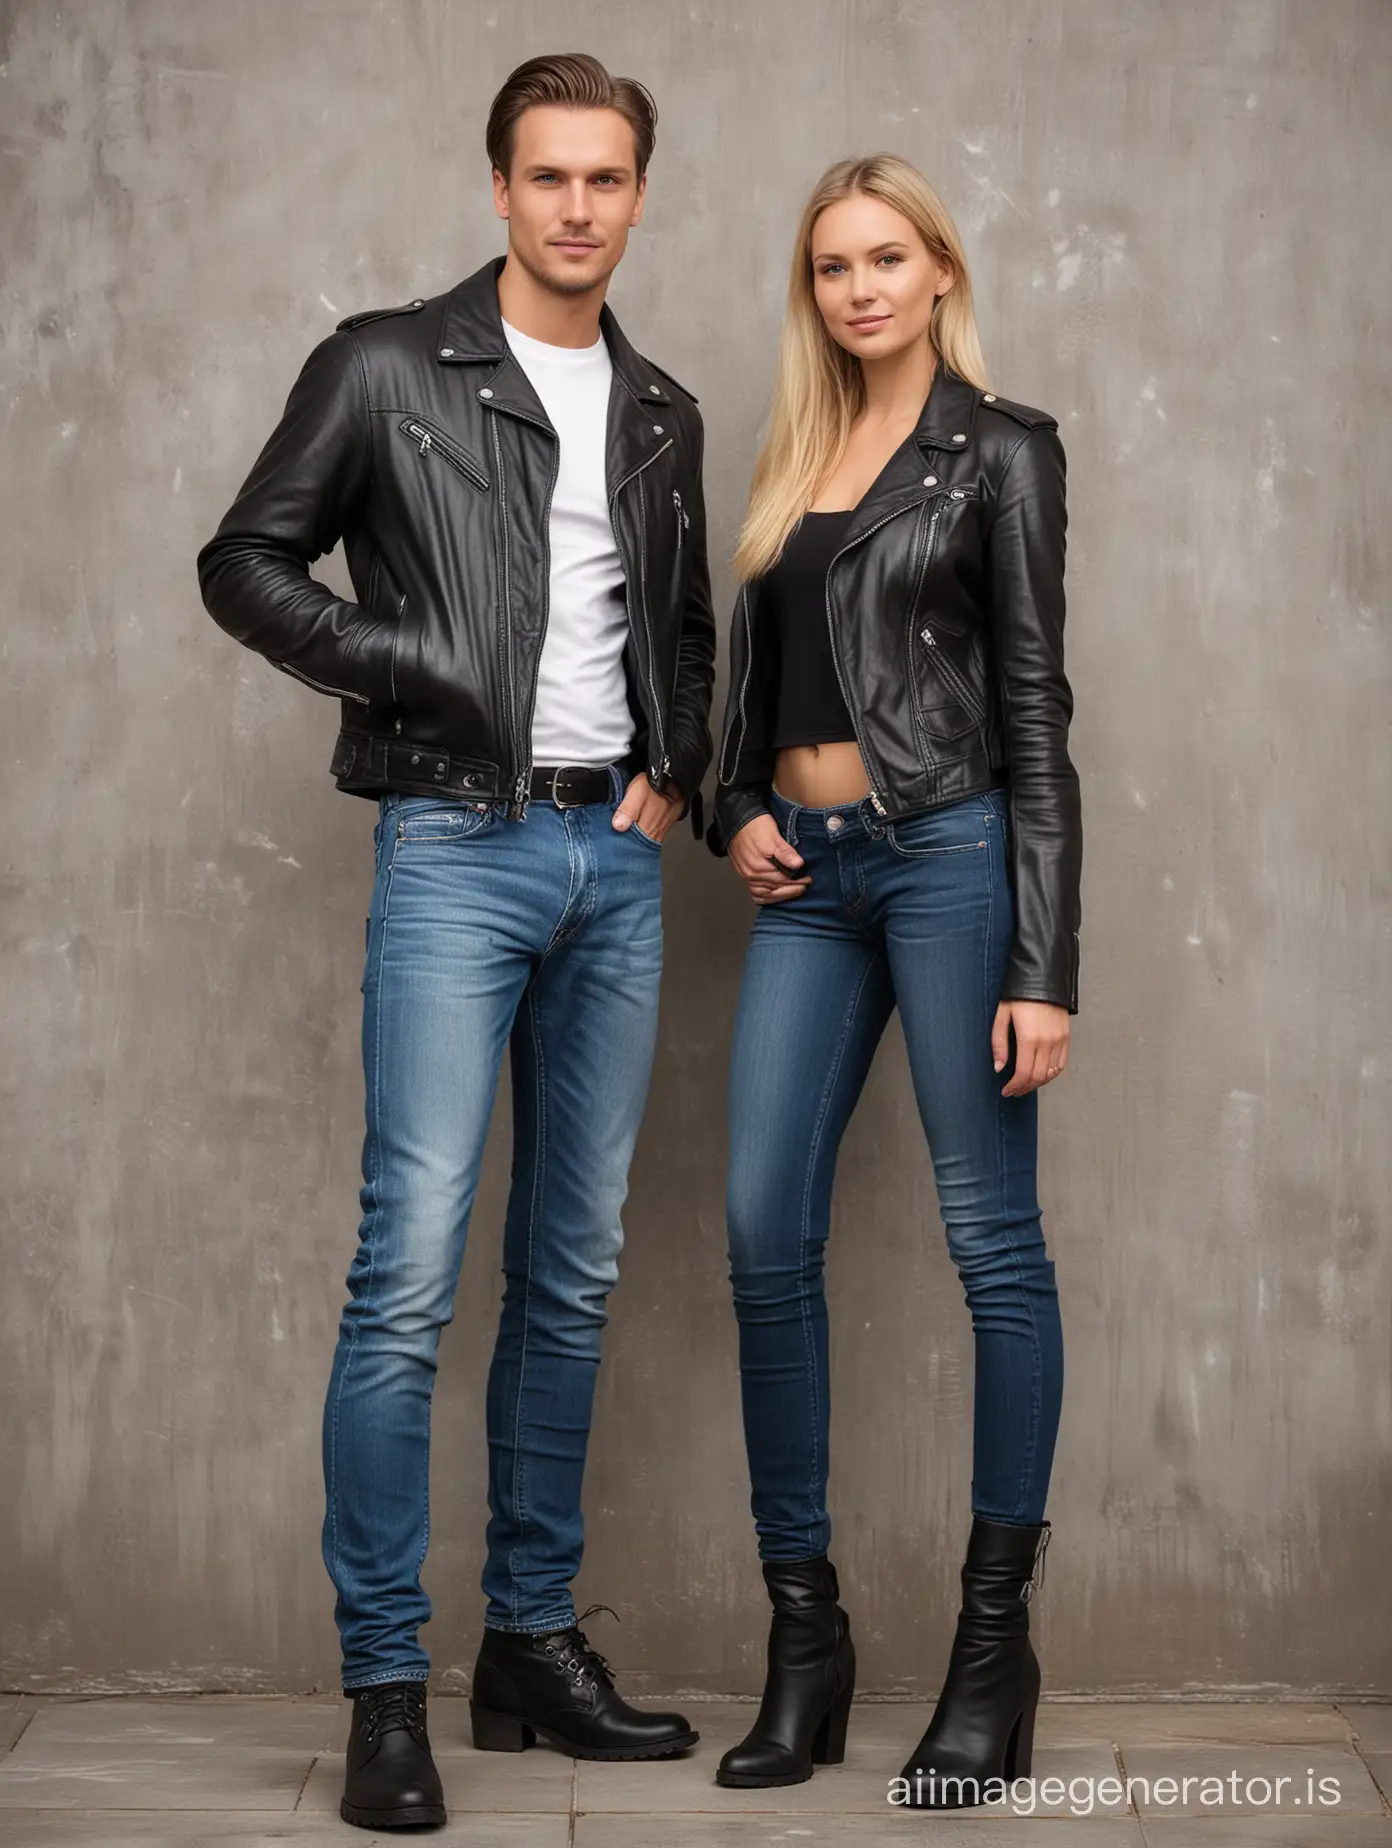 Finnish-Couple-in-Stylish-Leather-Jackets-and-Jeans-Full-Body-Portrait-of-Young-Adults-with-Long-Legs